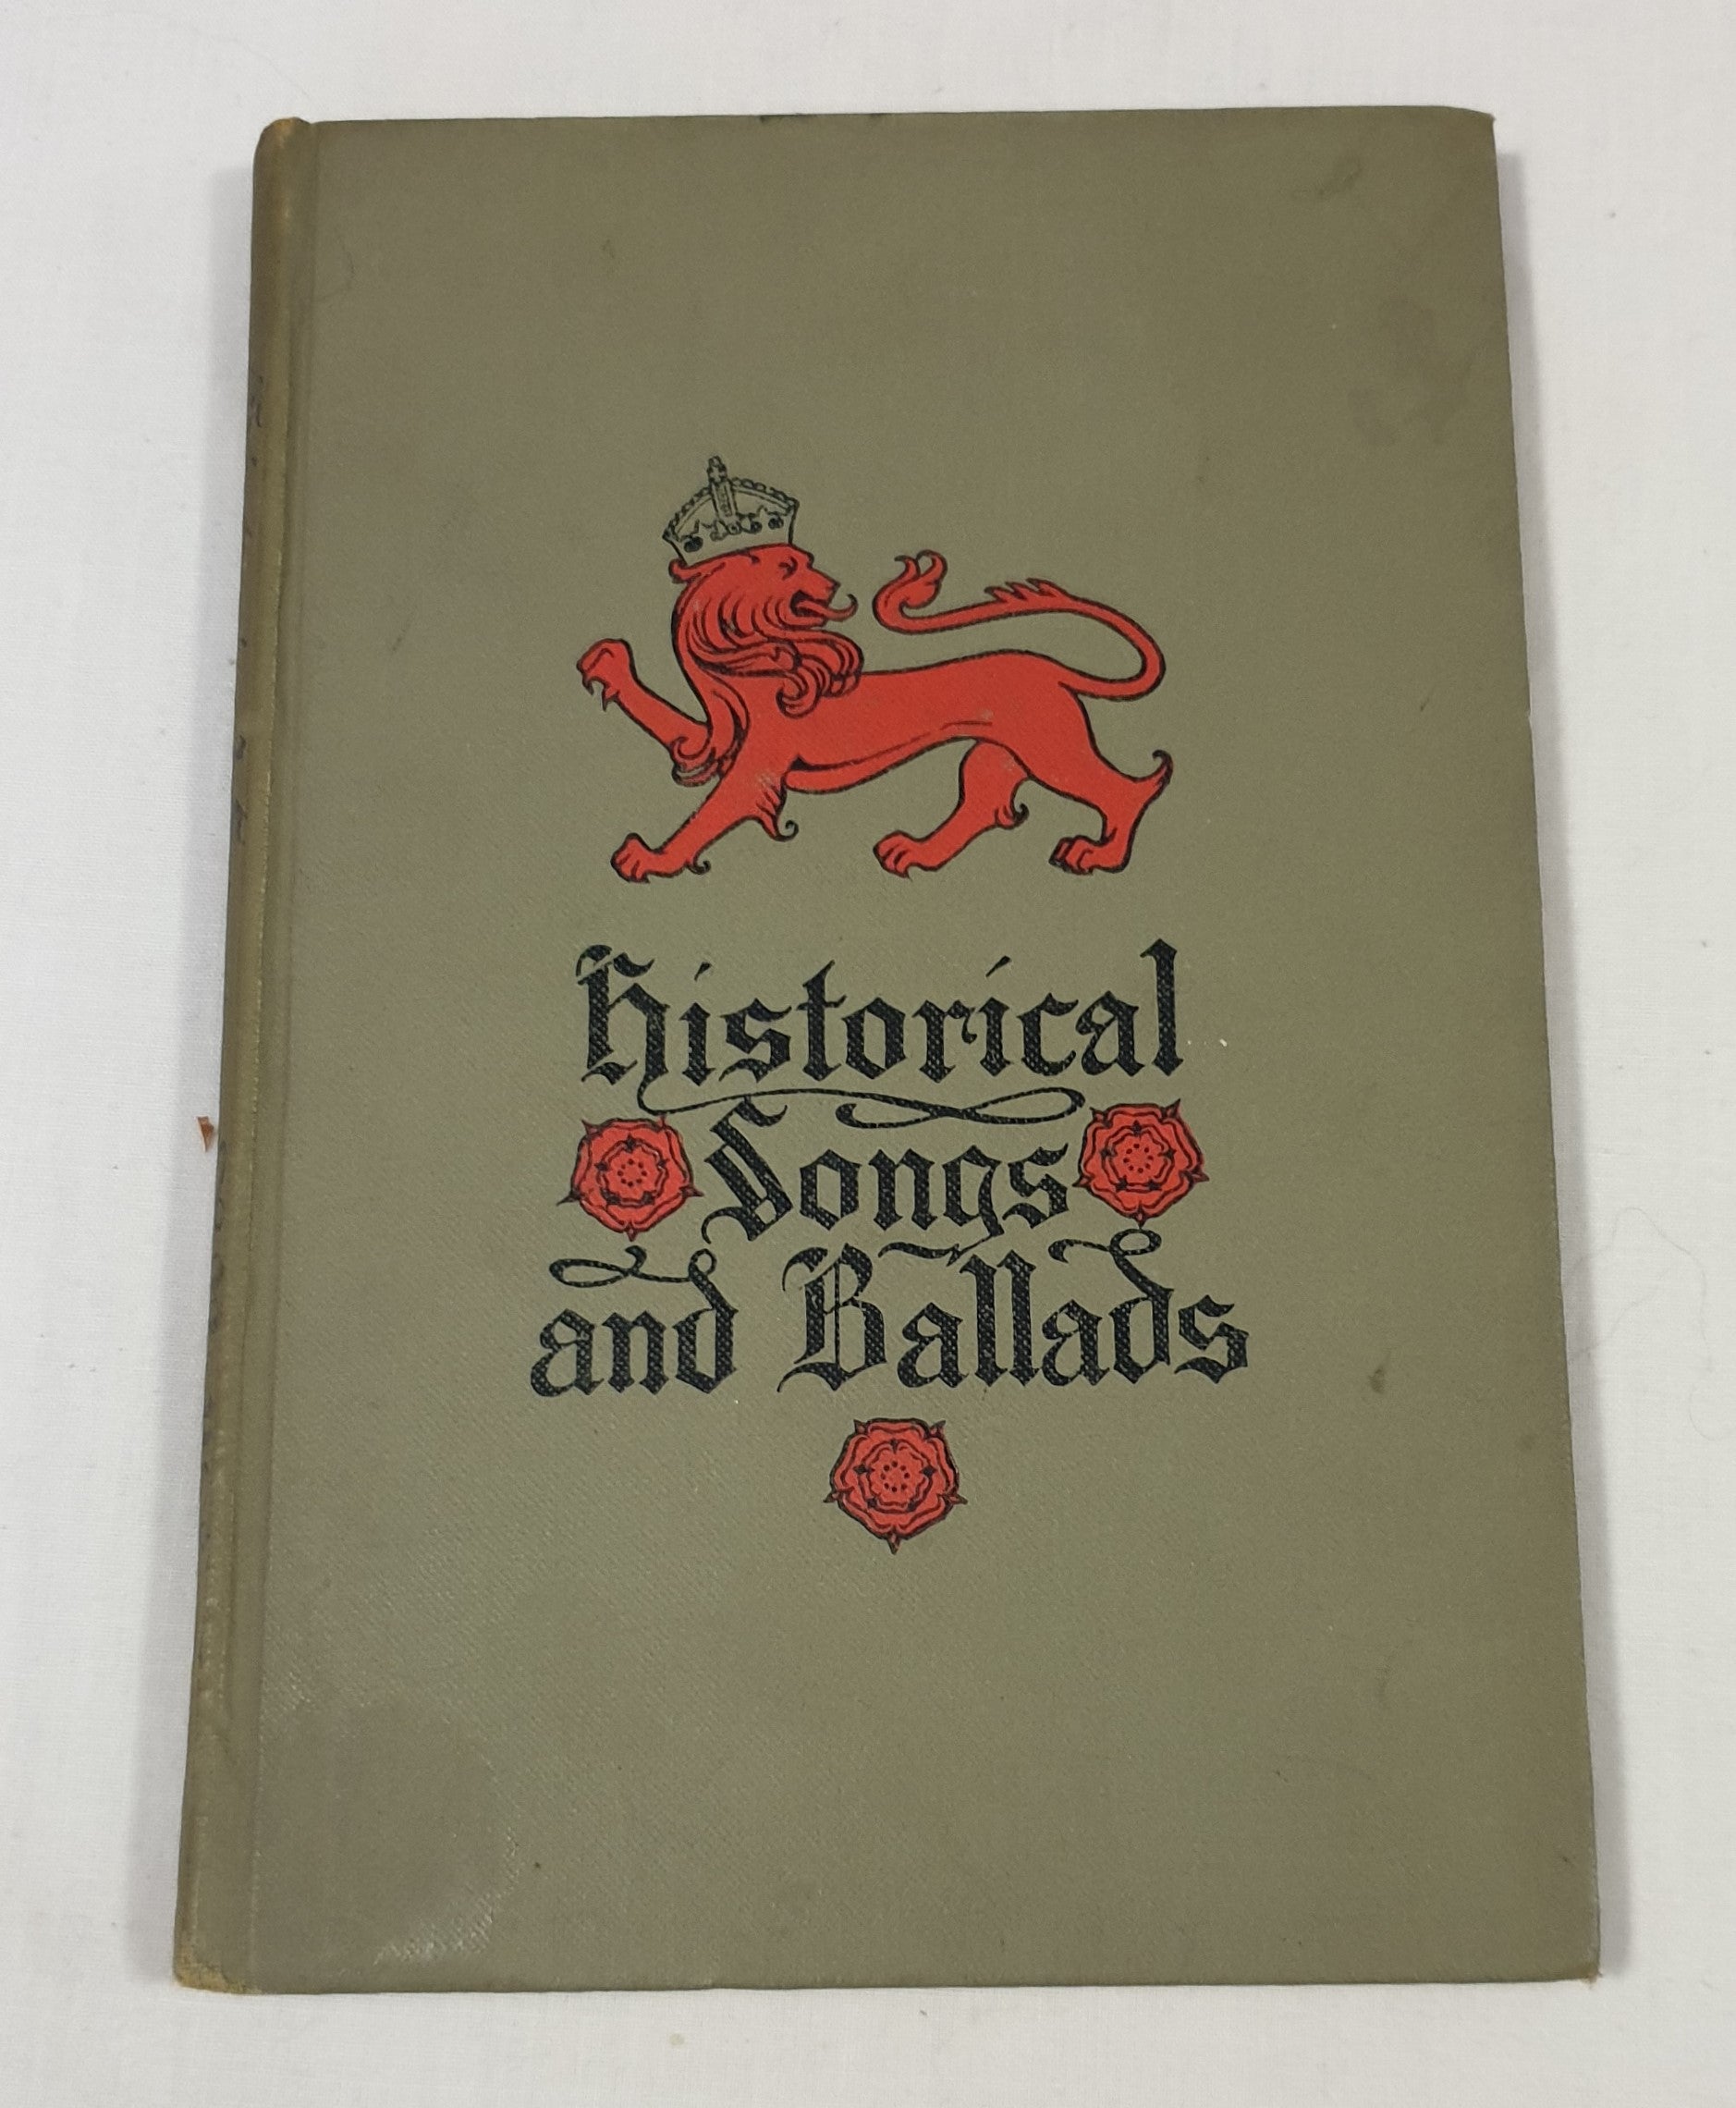 Historical Songs and Ballads by Dorothy Margaret Stuart